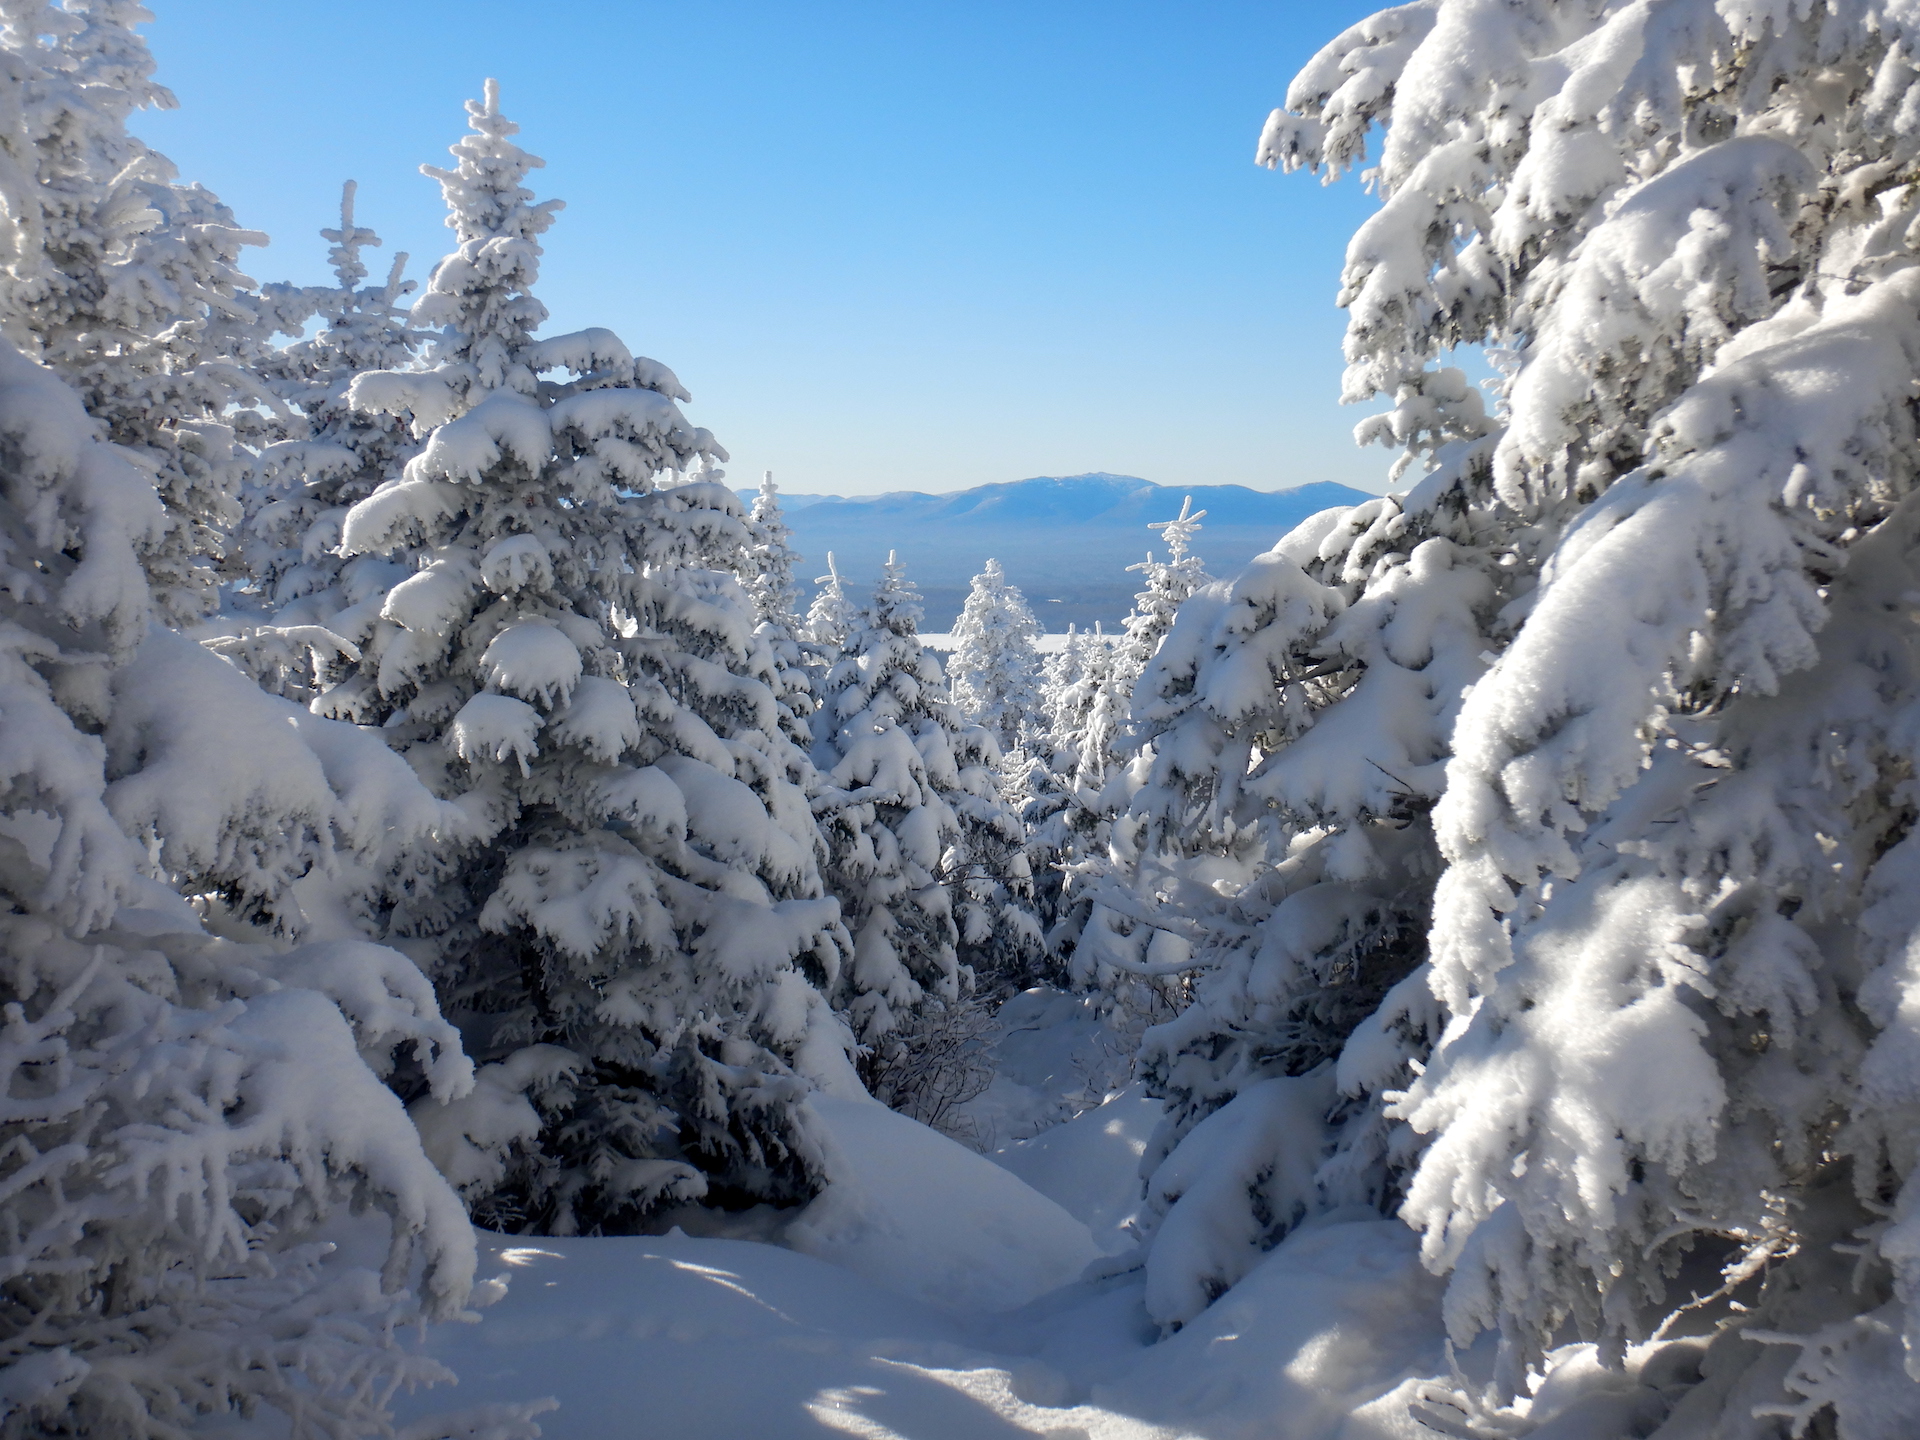 View of snowy conifer trees looking toward mountains on a far horizon. The trees are pyramidal in shape and their branches are covered in thick snow. The ground is fully snow covered. A blue sky fills the upper half of the photo.